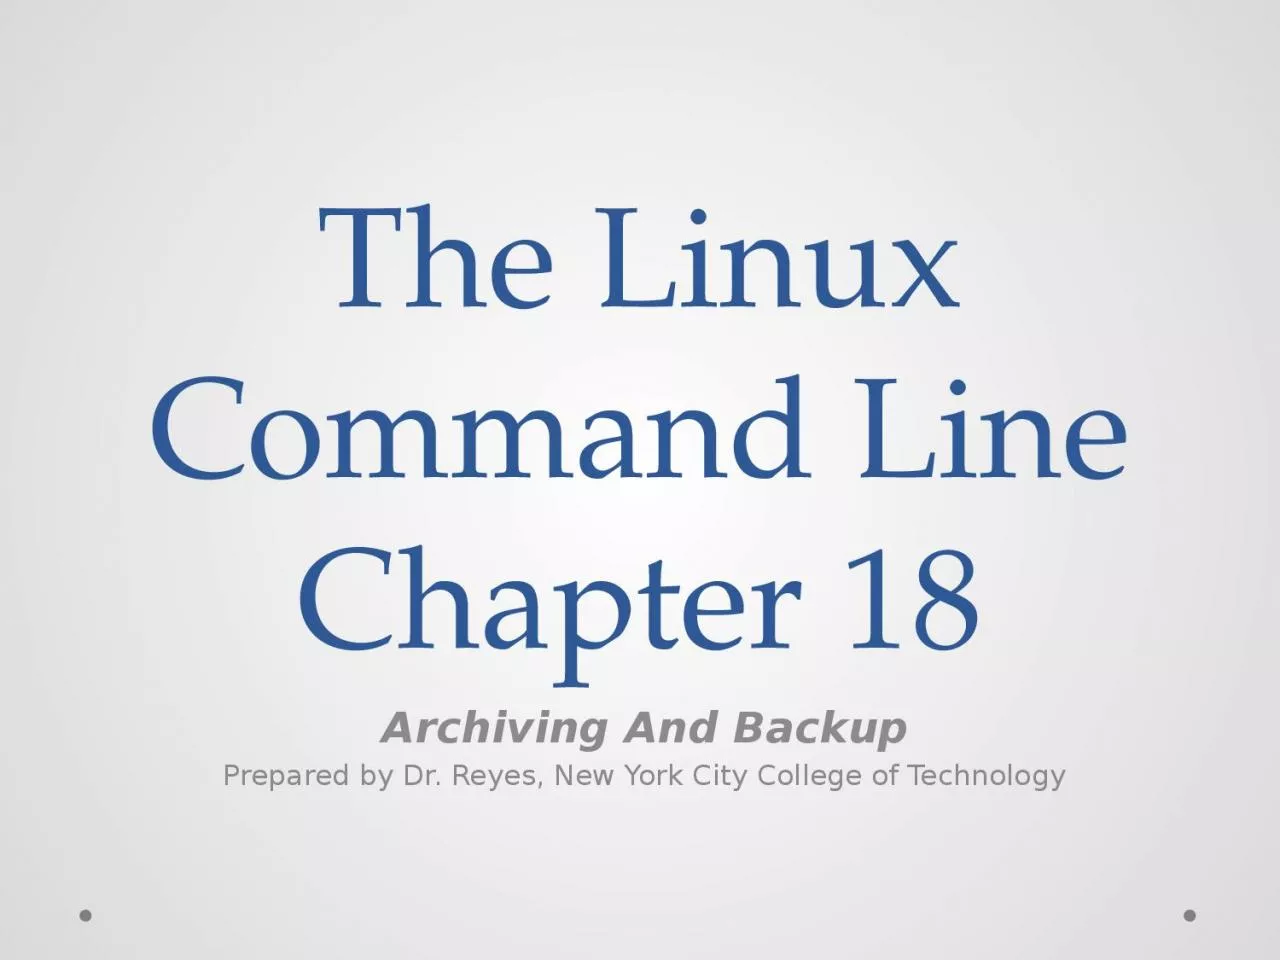 The Linux Command Line Chapter 18